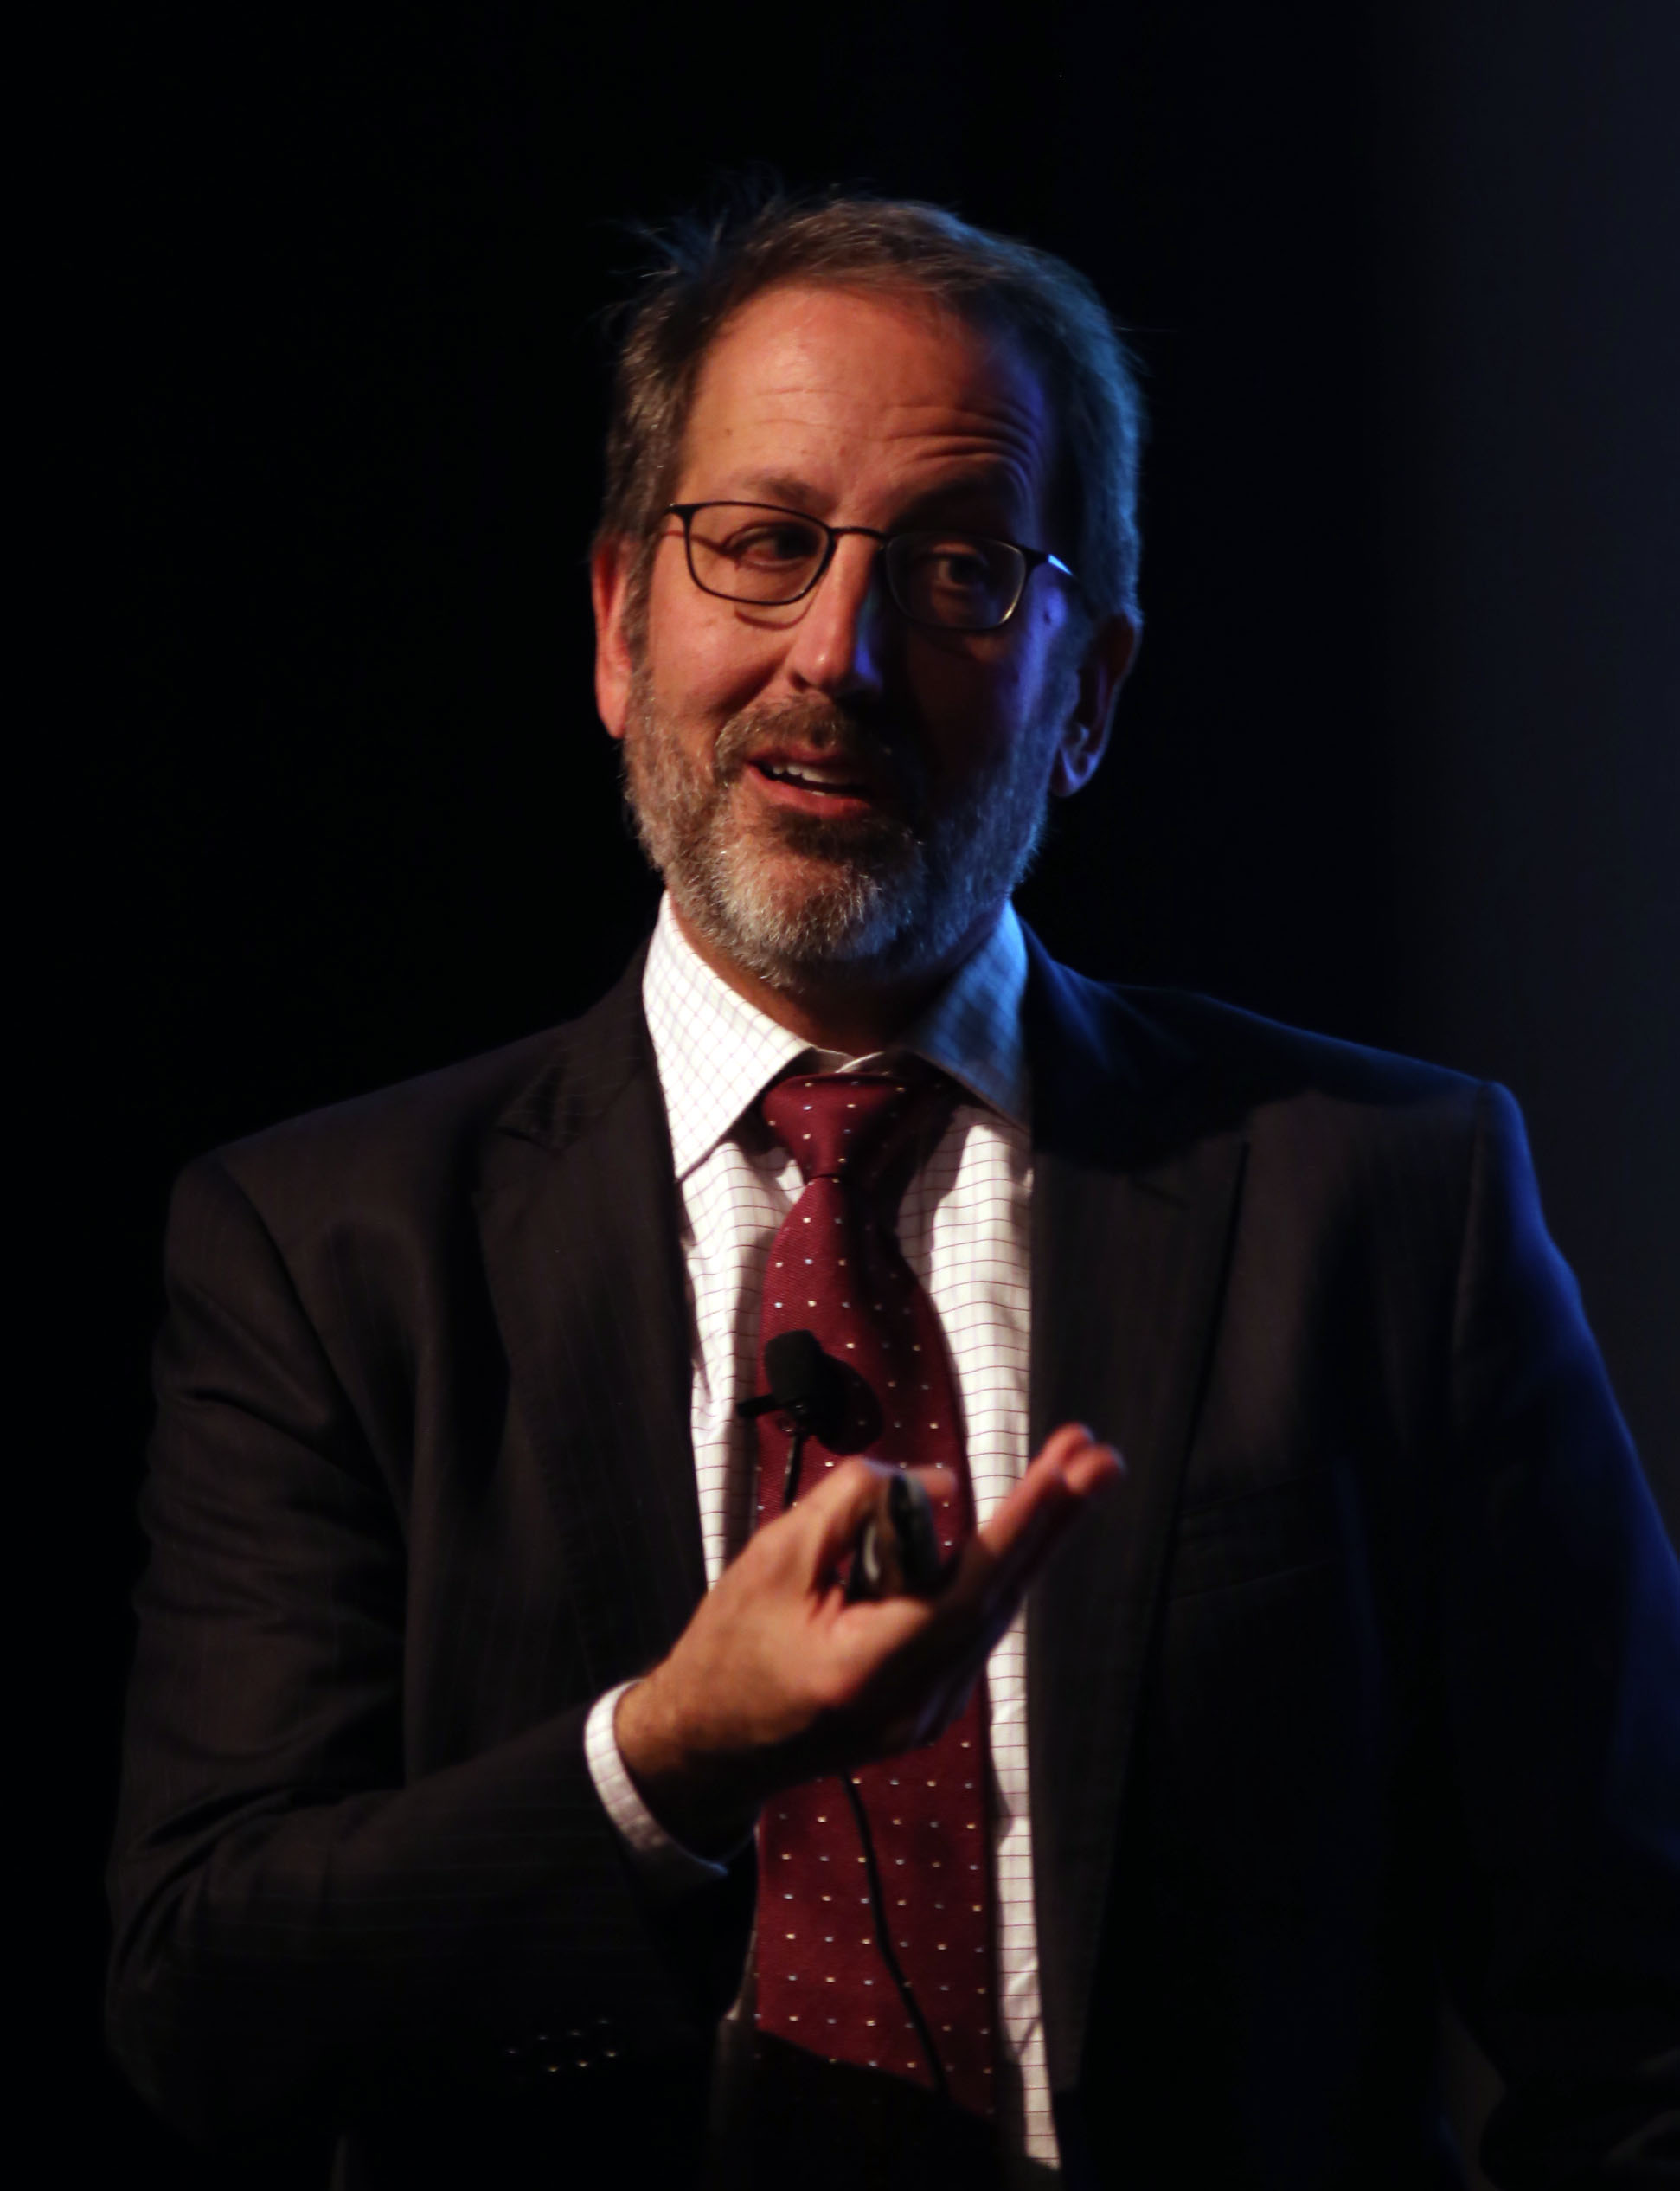 Hydrologist Jay Famiglietti speaks at water symposium held at the Annenberg theater at the Palm Springs Art Museum, March 20, 2014.